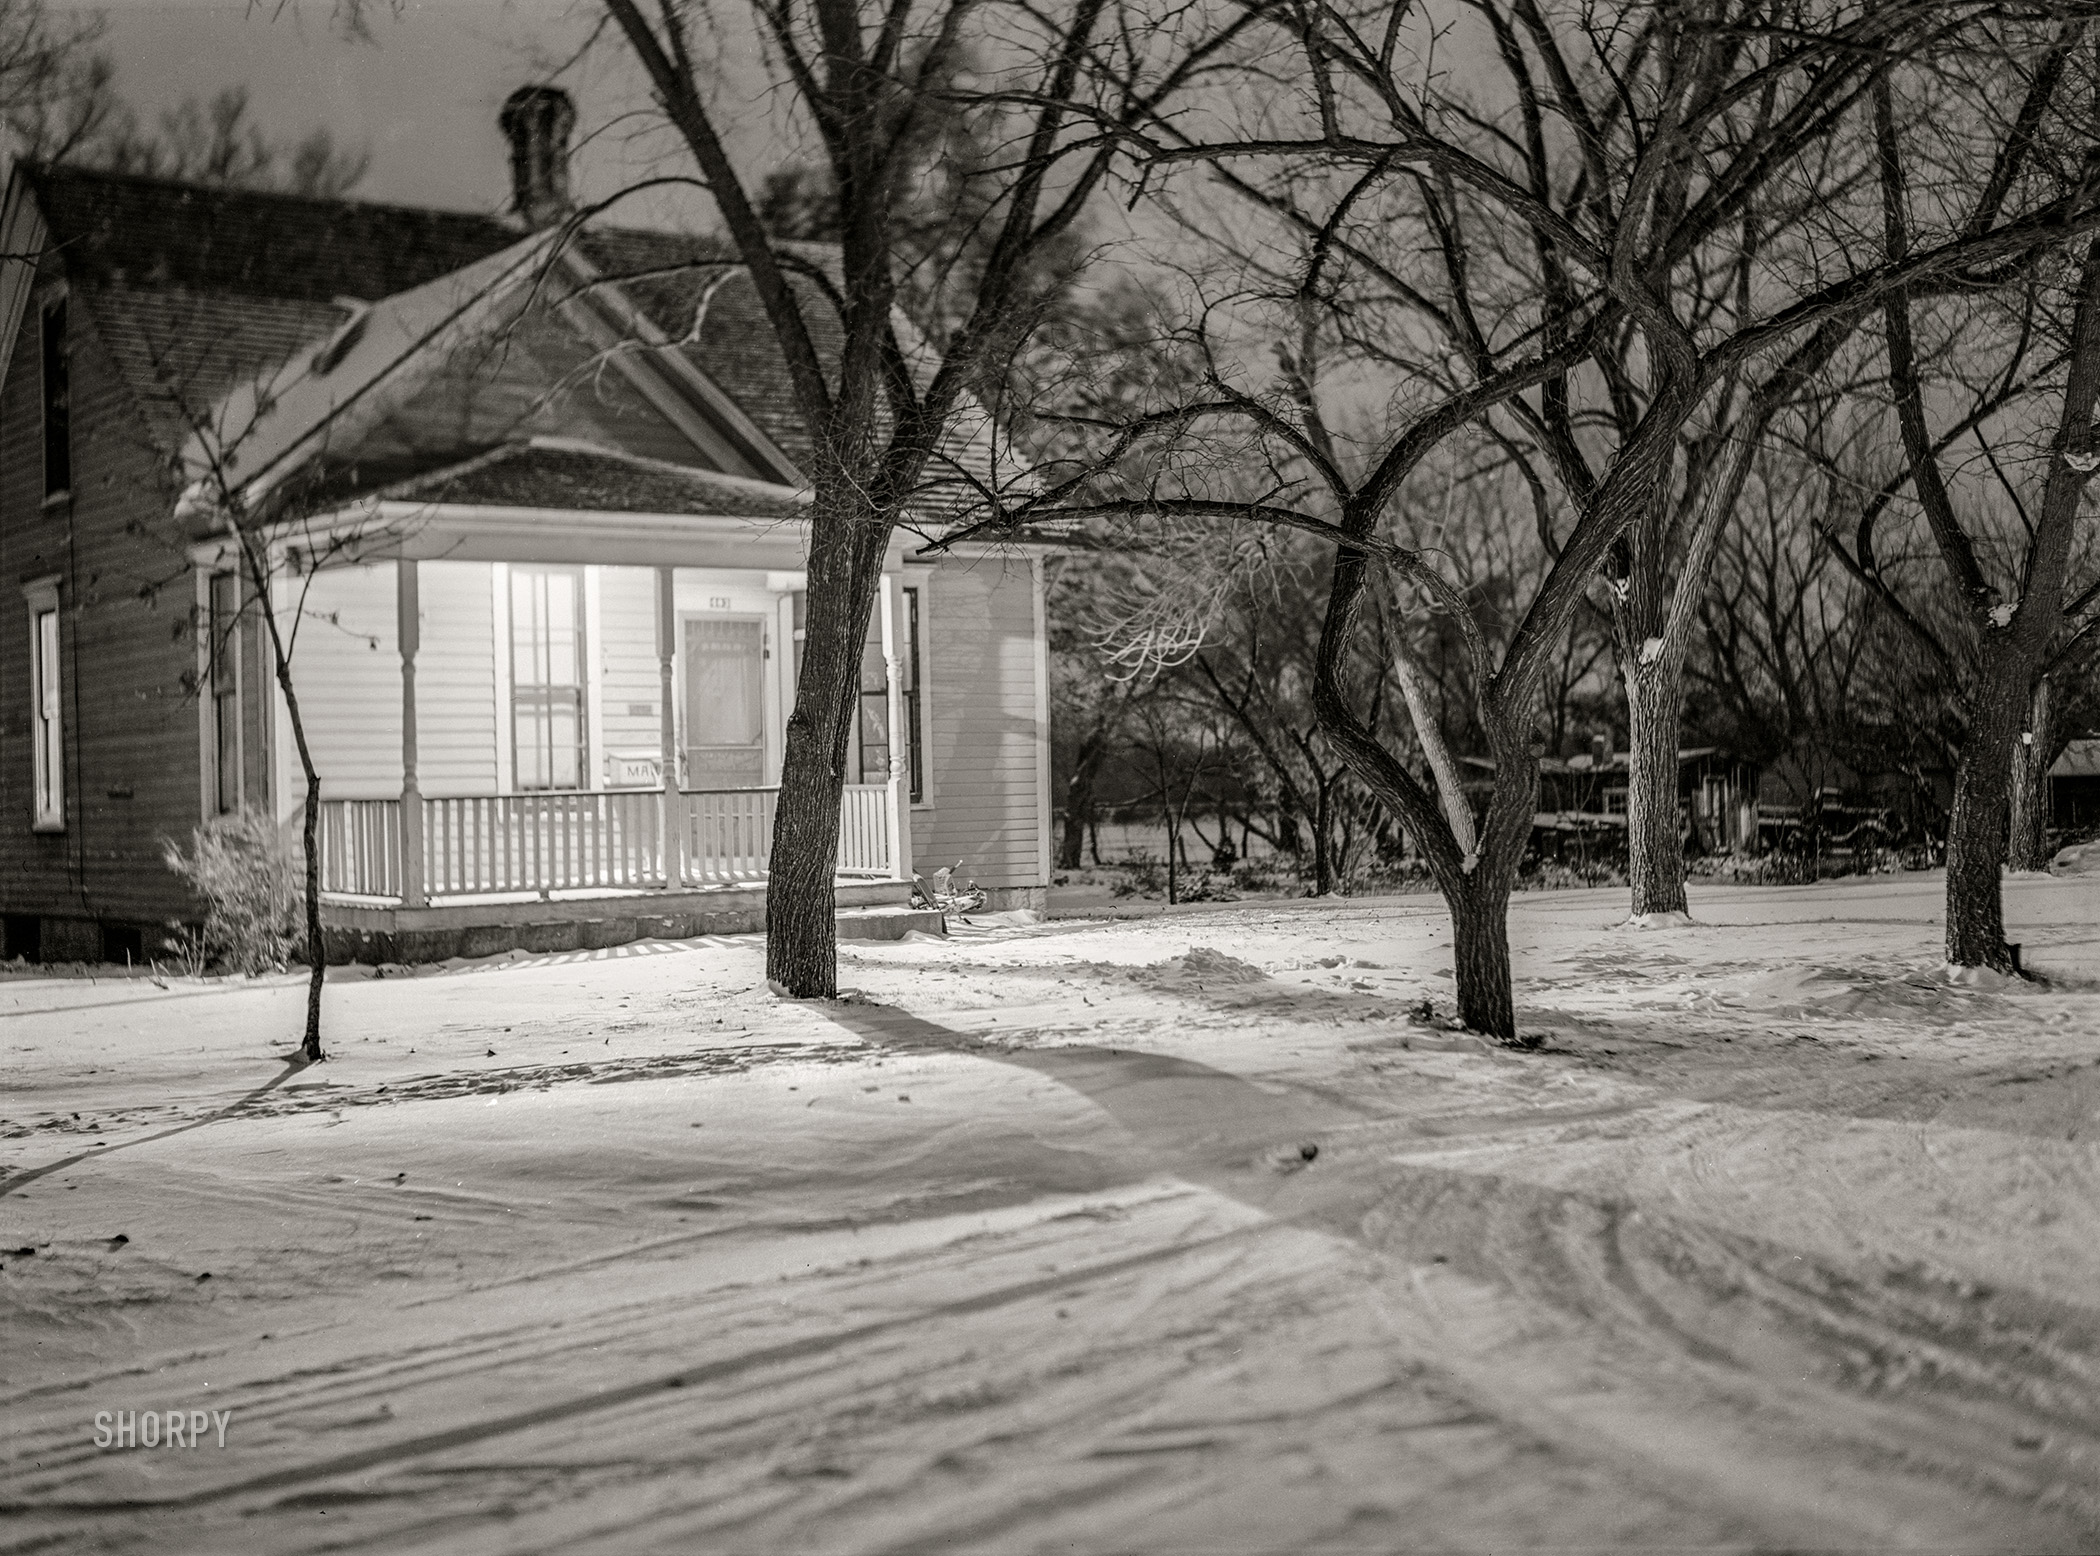 November 1940. "Porch light to welcome expected visitors. Pierre, South Dakota." Medium format acetate negative by John Vachon for the Farm Security Administration. View full size.